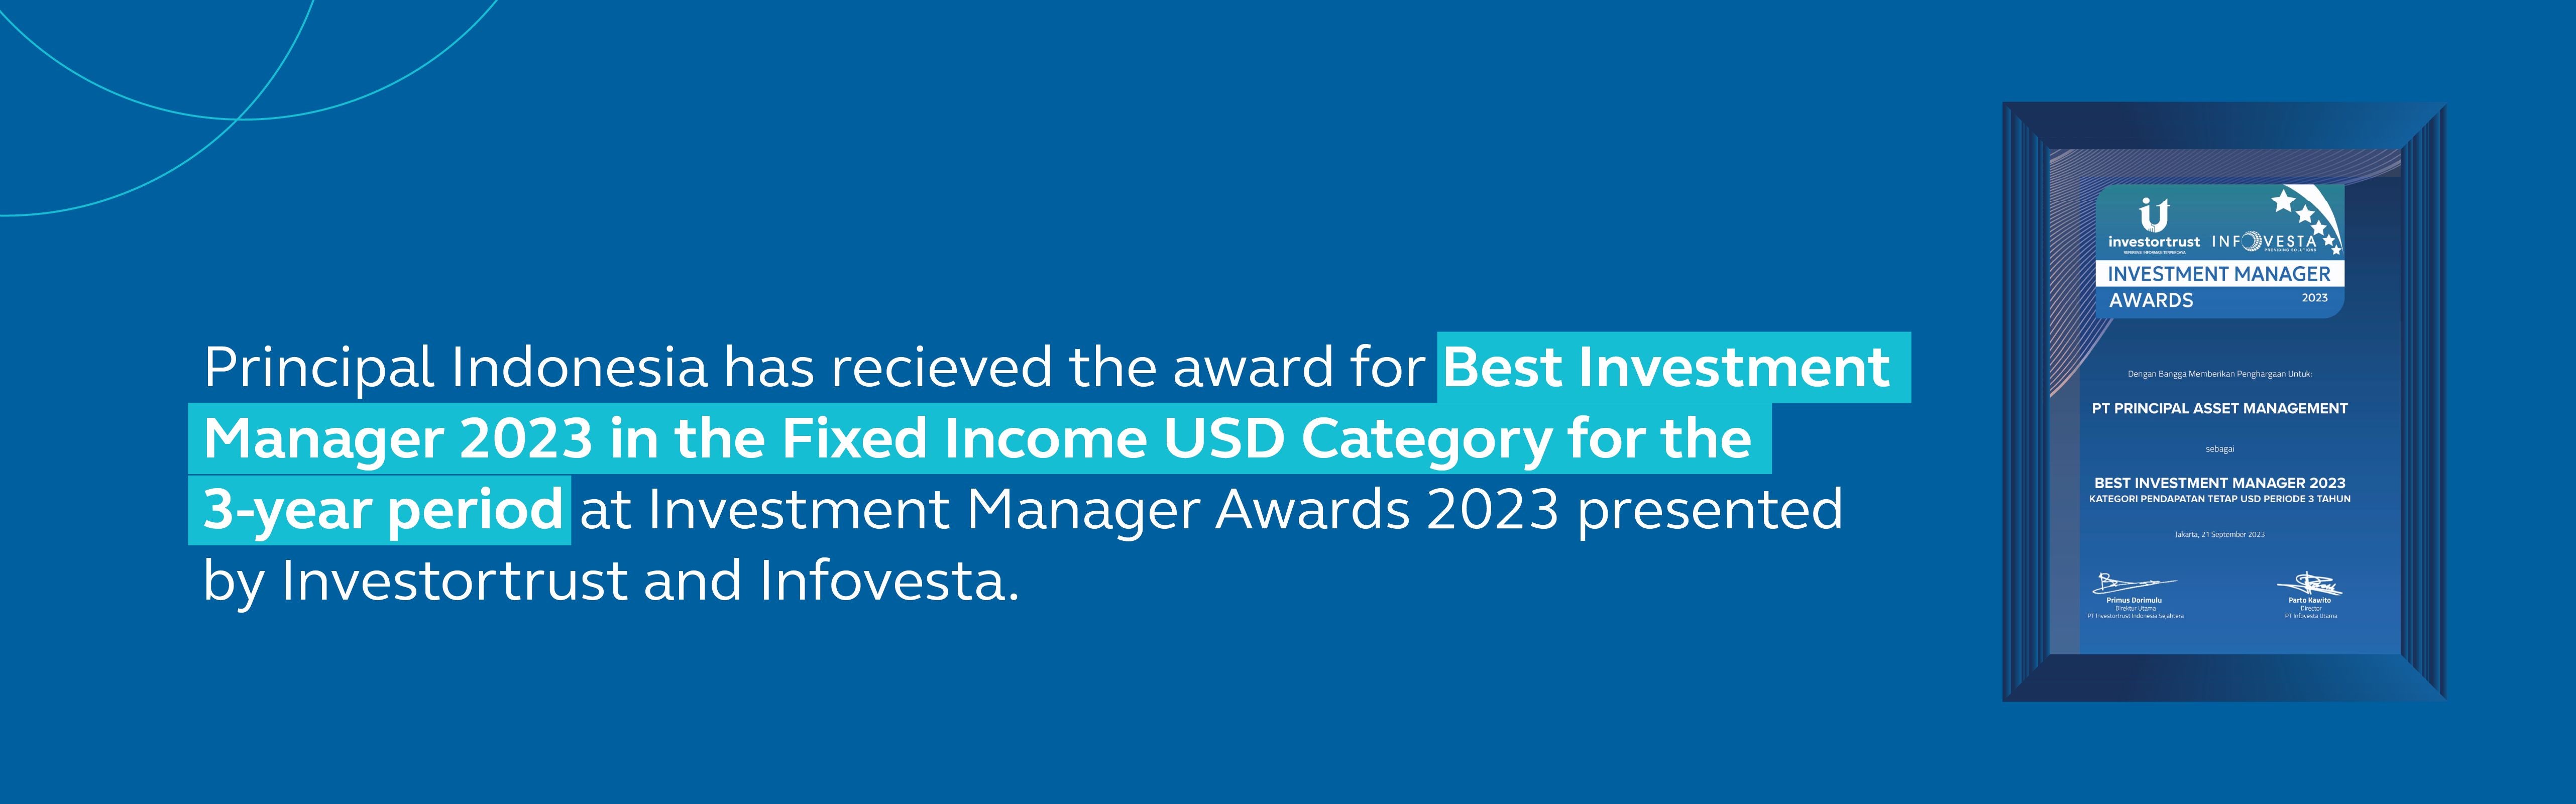 Principal Indonesia Receives Awards as Best Investment Manager 2023 from Investortrust.id